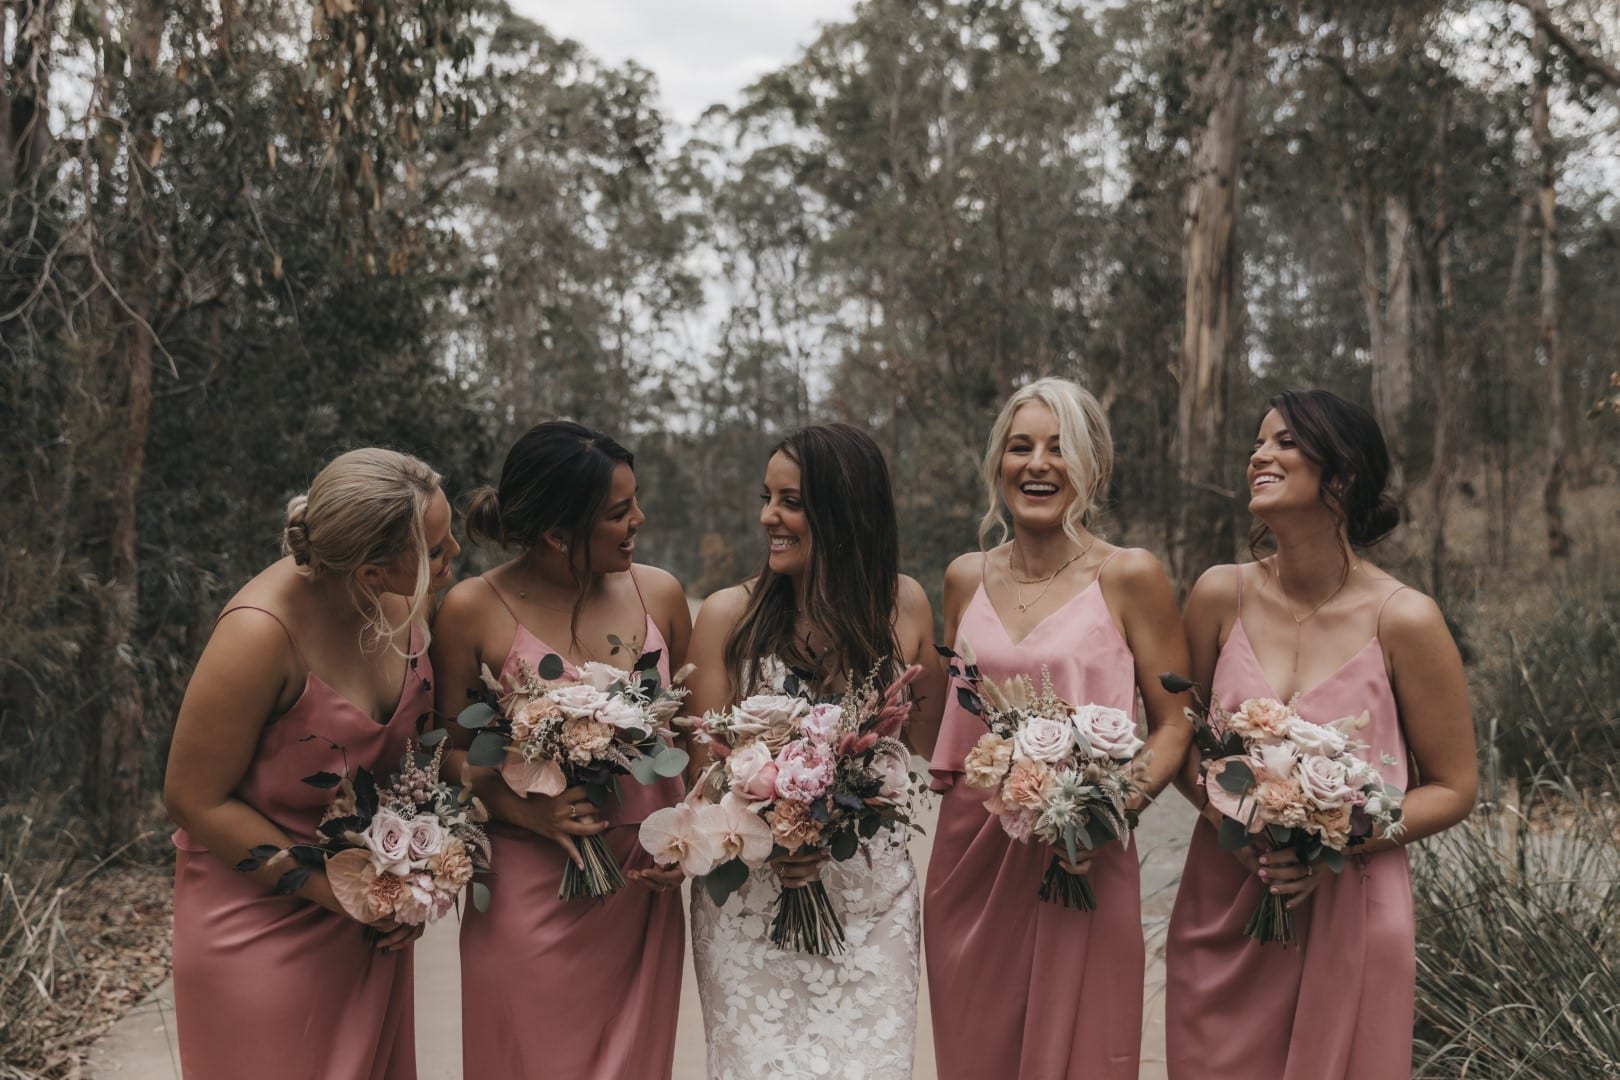 Julia wears the Livie by Enzoani wedding dress with bridesmaids in pink